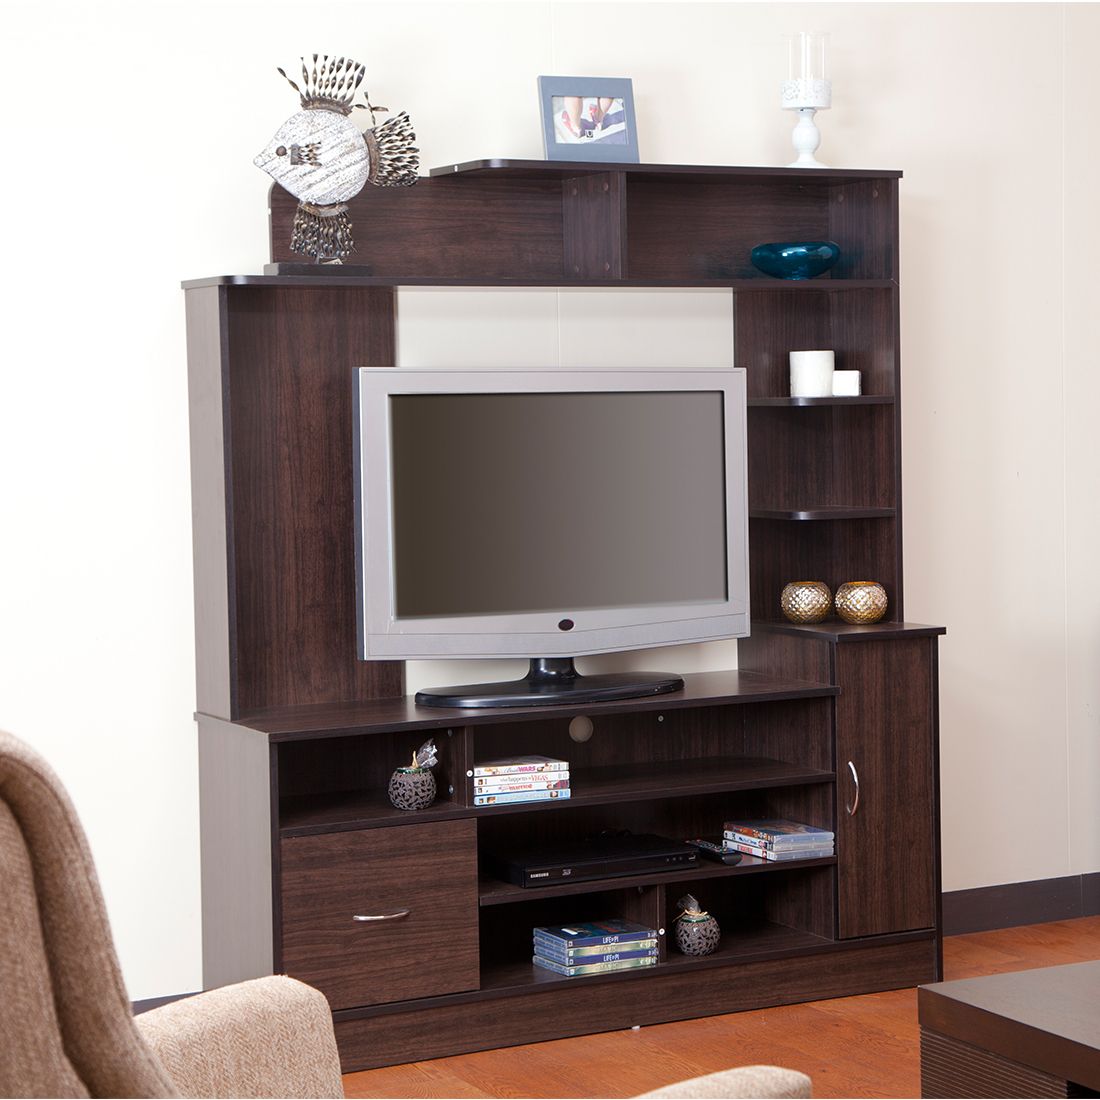 Payton Engineered Wood Tv Unit In Wenge Colourhometown With Regard To Payton Serving Sideboards (View 19 of 30)